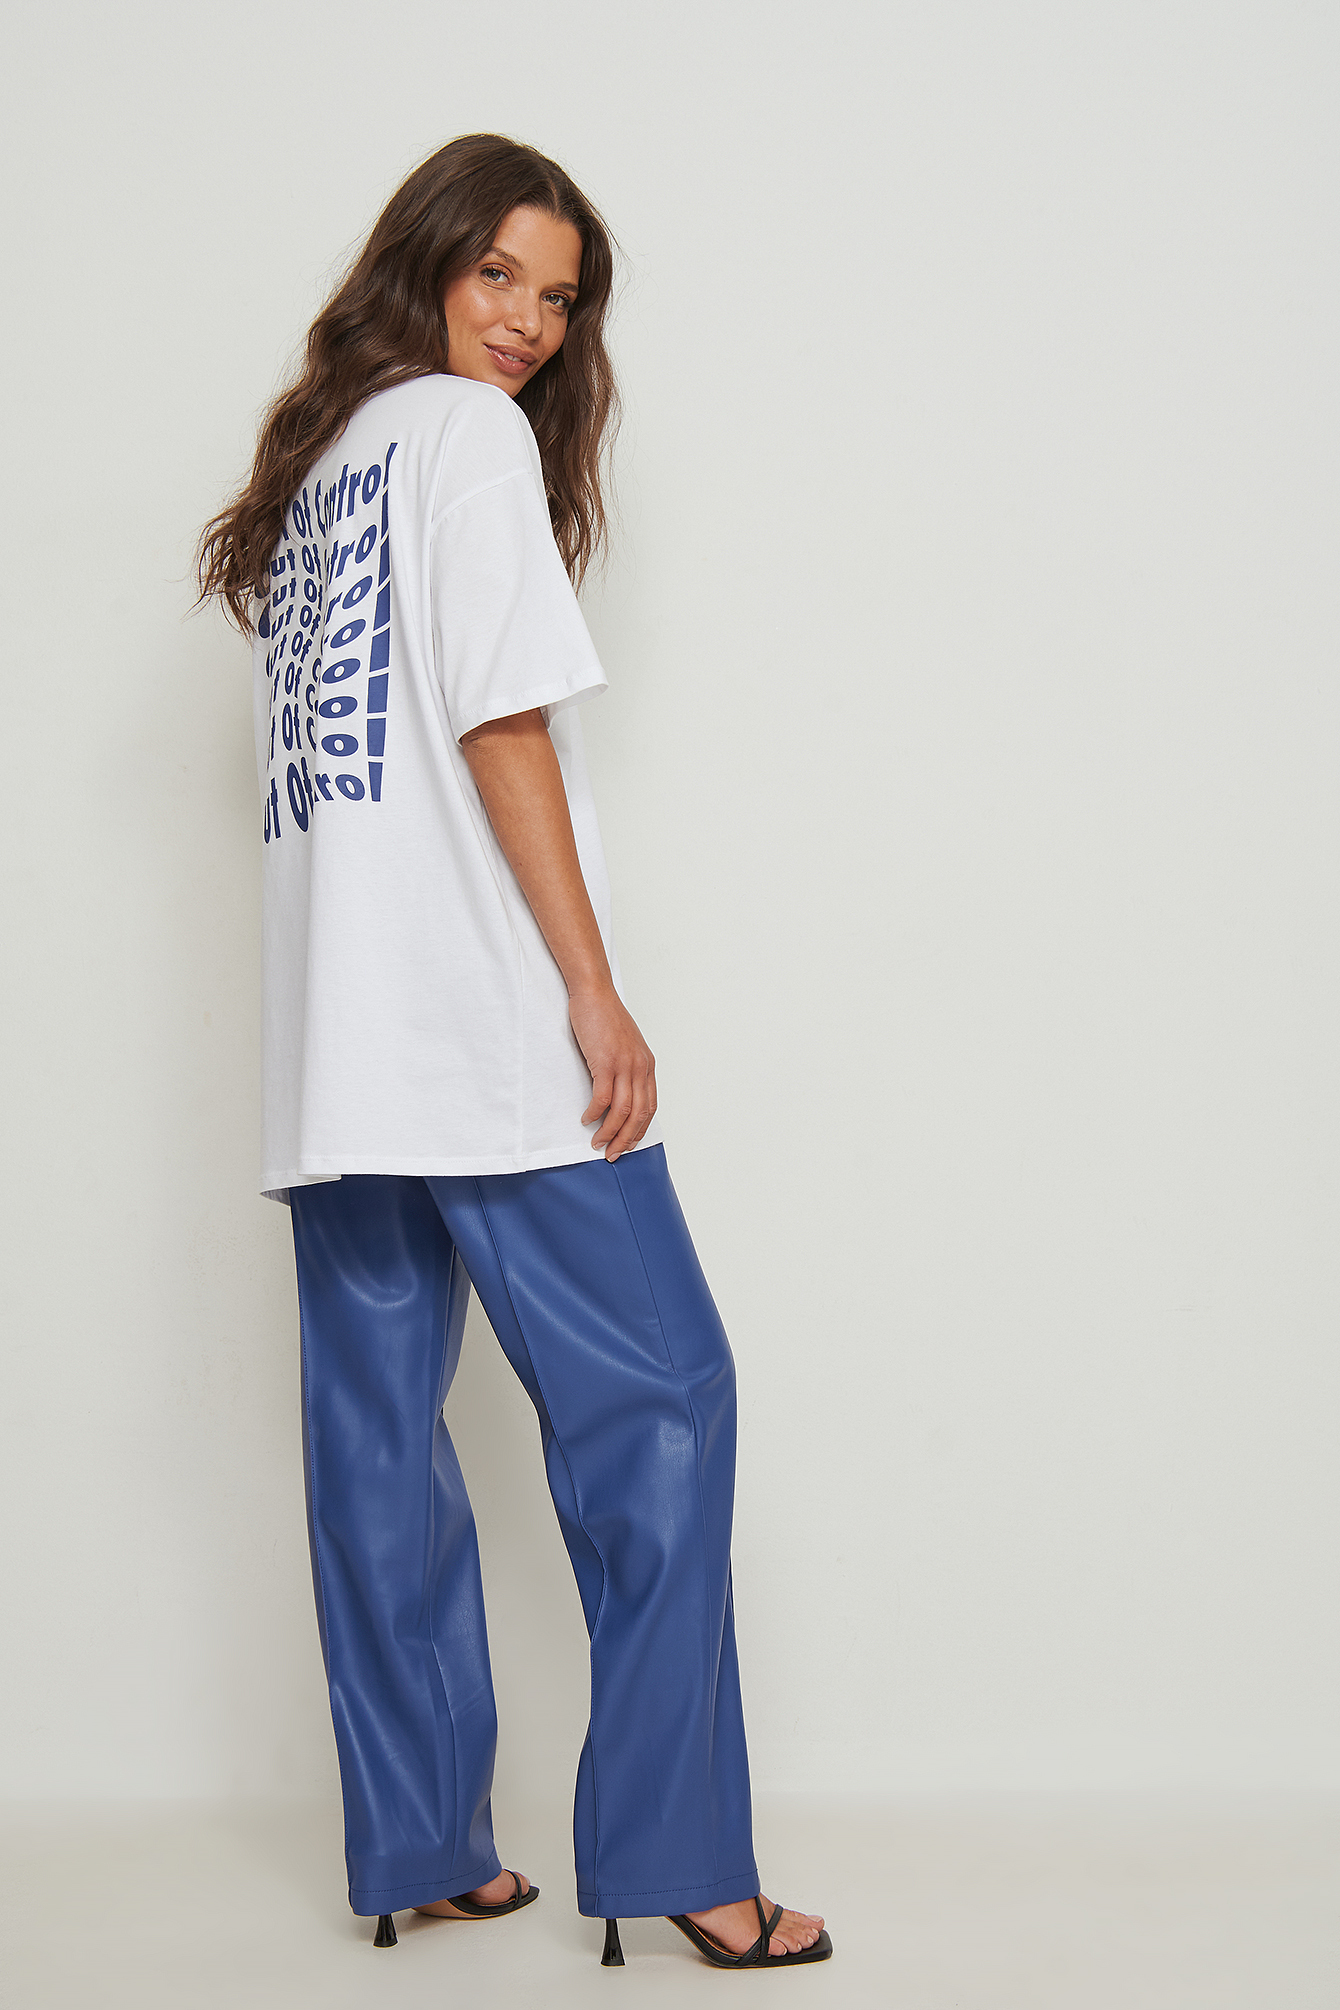 Organic Printed Oversized Tee Outfit